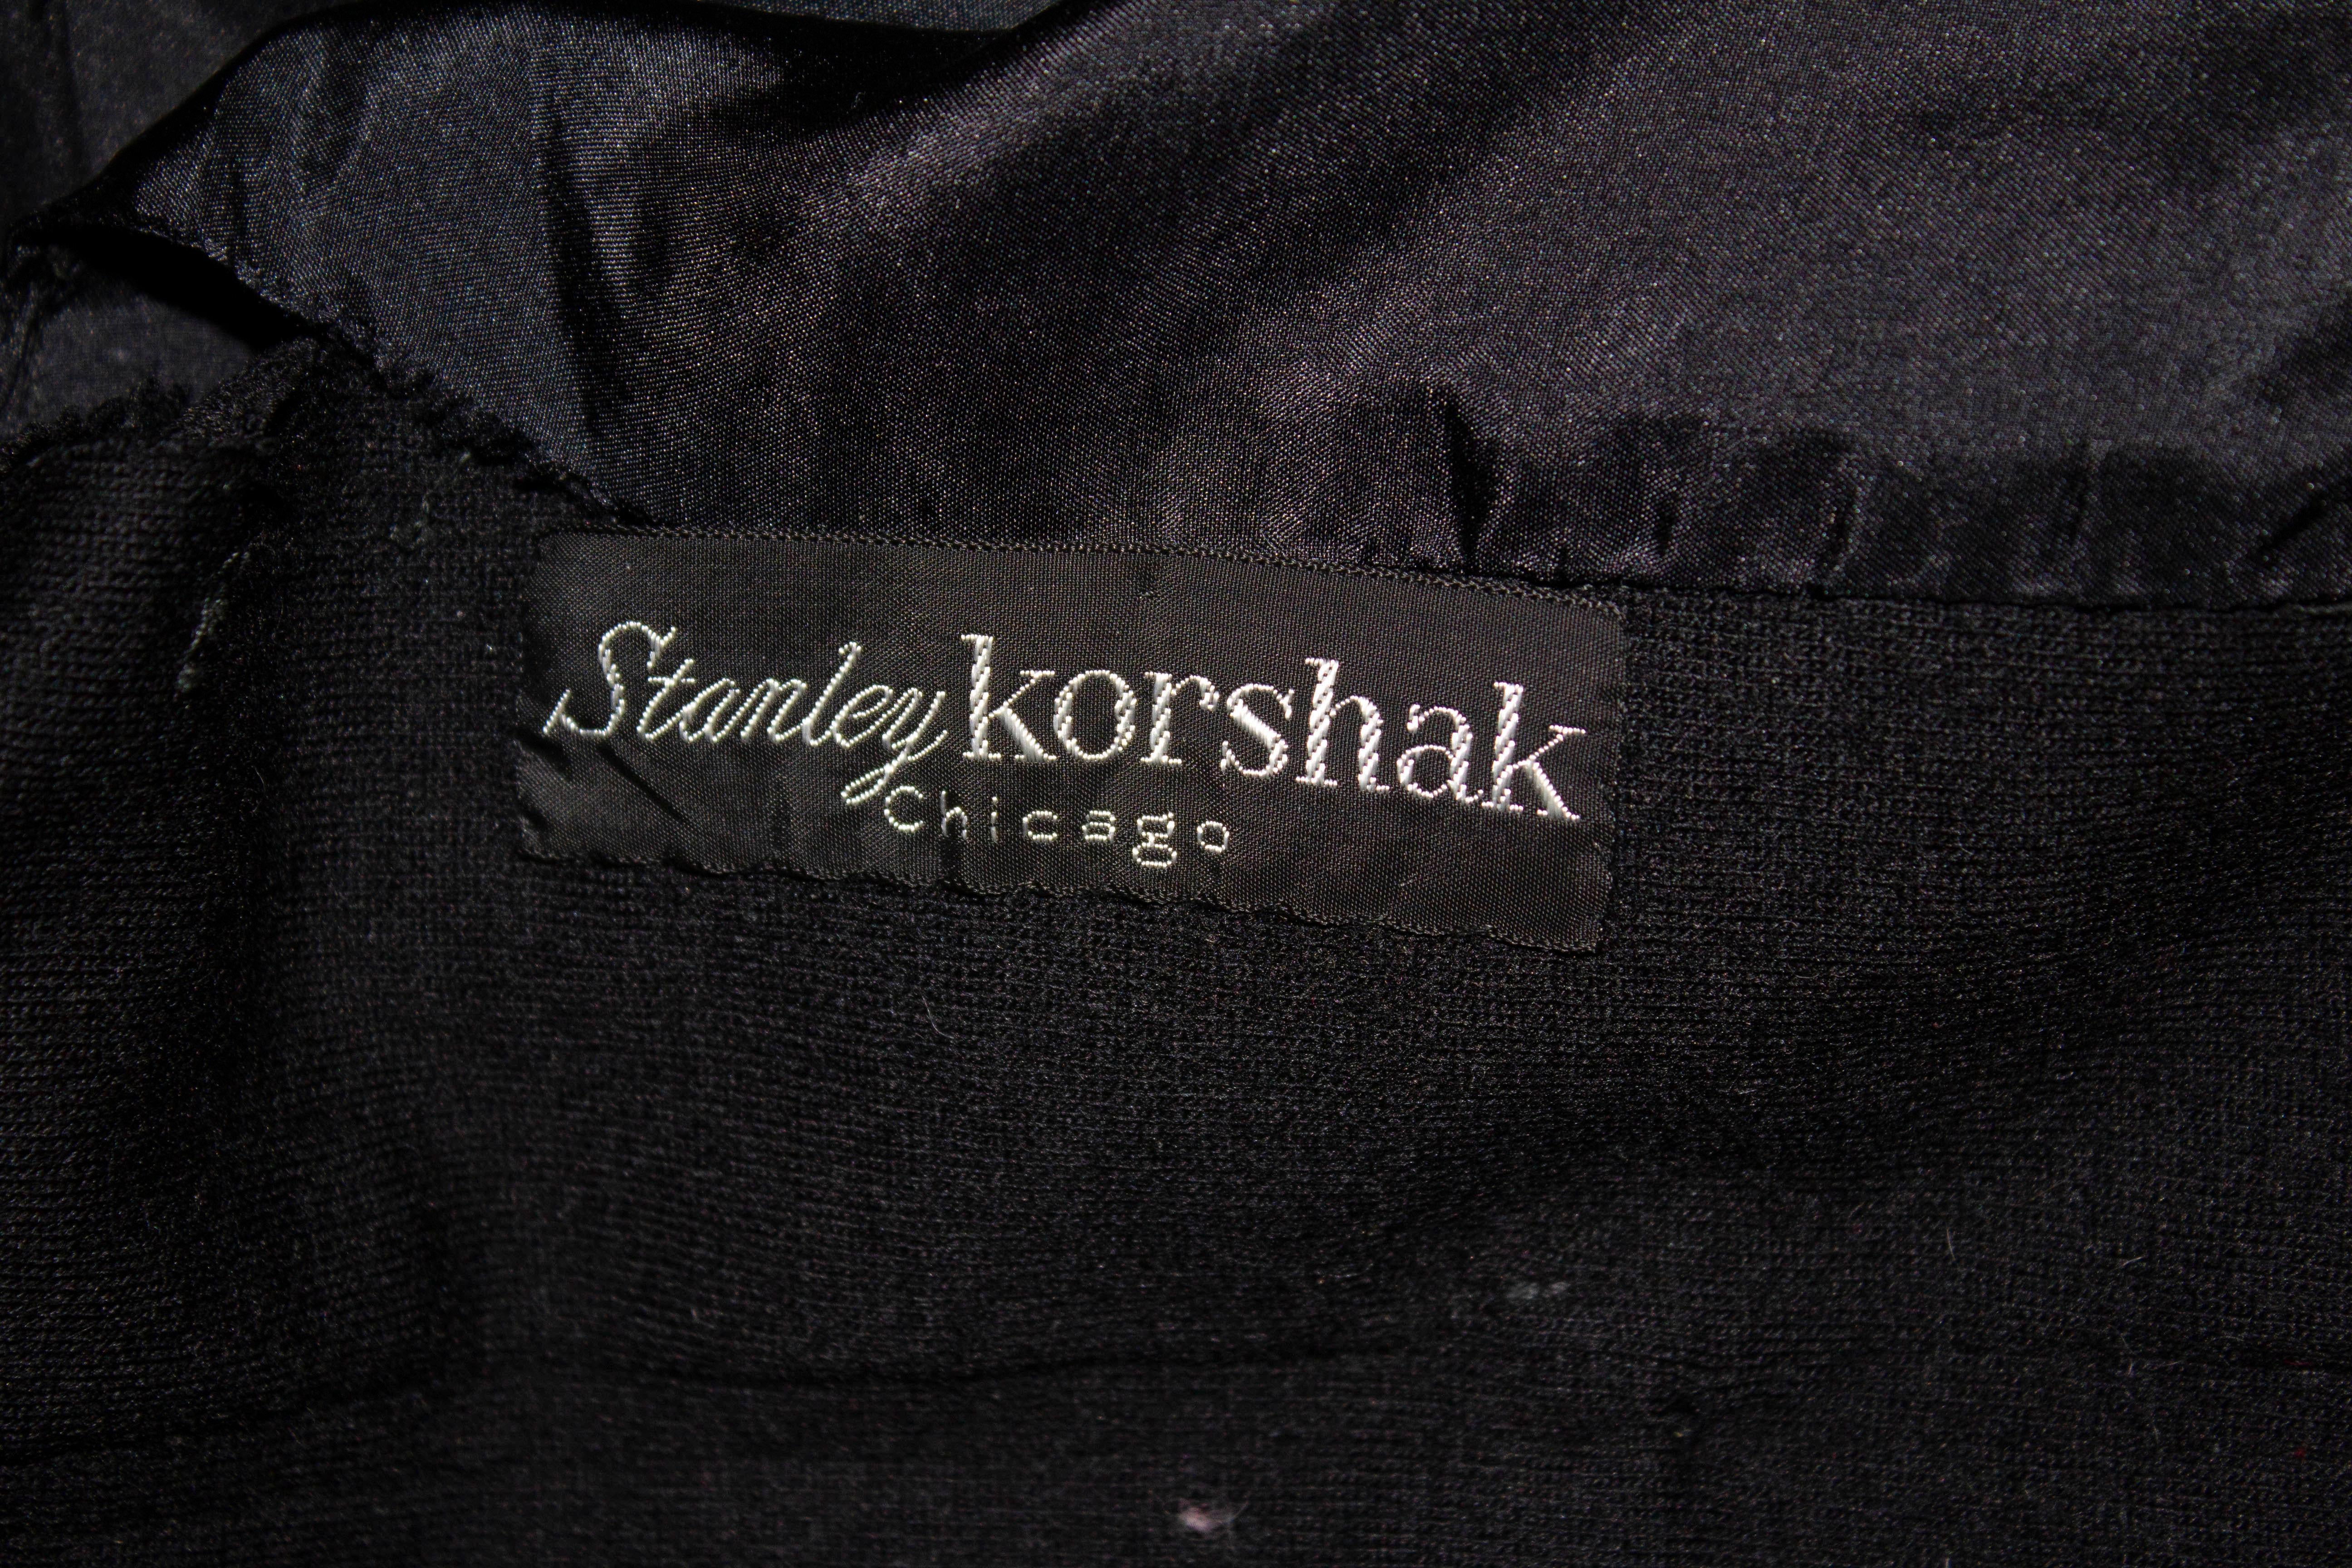 A chic vintage cocktail dress by Stanley Korshak. The dress is in a black jersey with bow detail on the front. It has a front zip opening,  gathering at the waist and is fully lined. 
Measurements: Bust 36 '', waist 28'',length 43'' plus a 4'' hem.